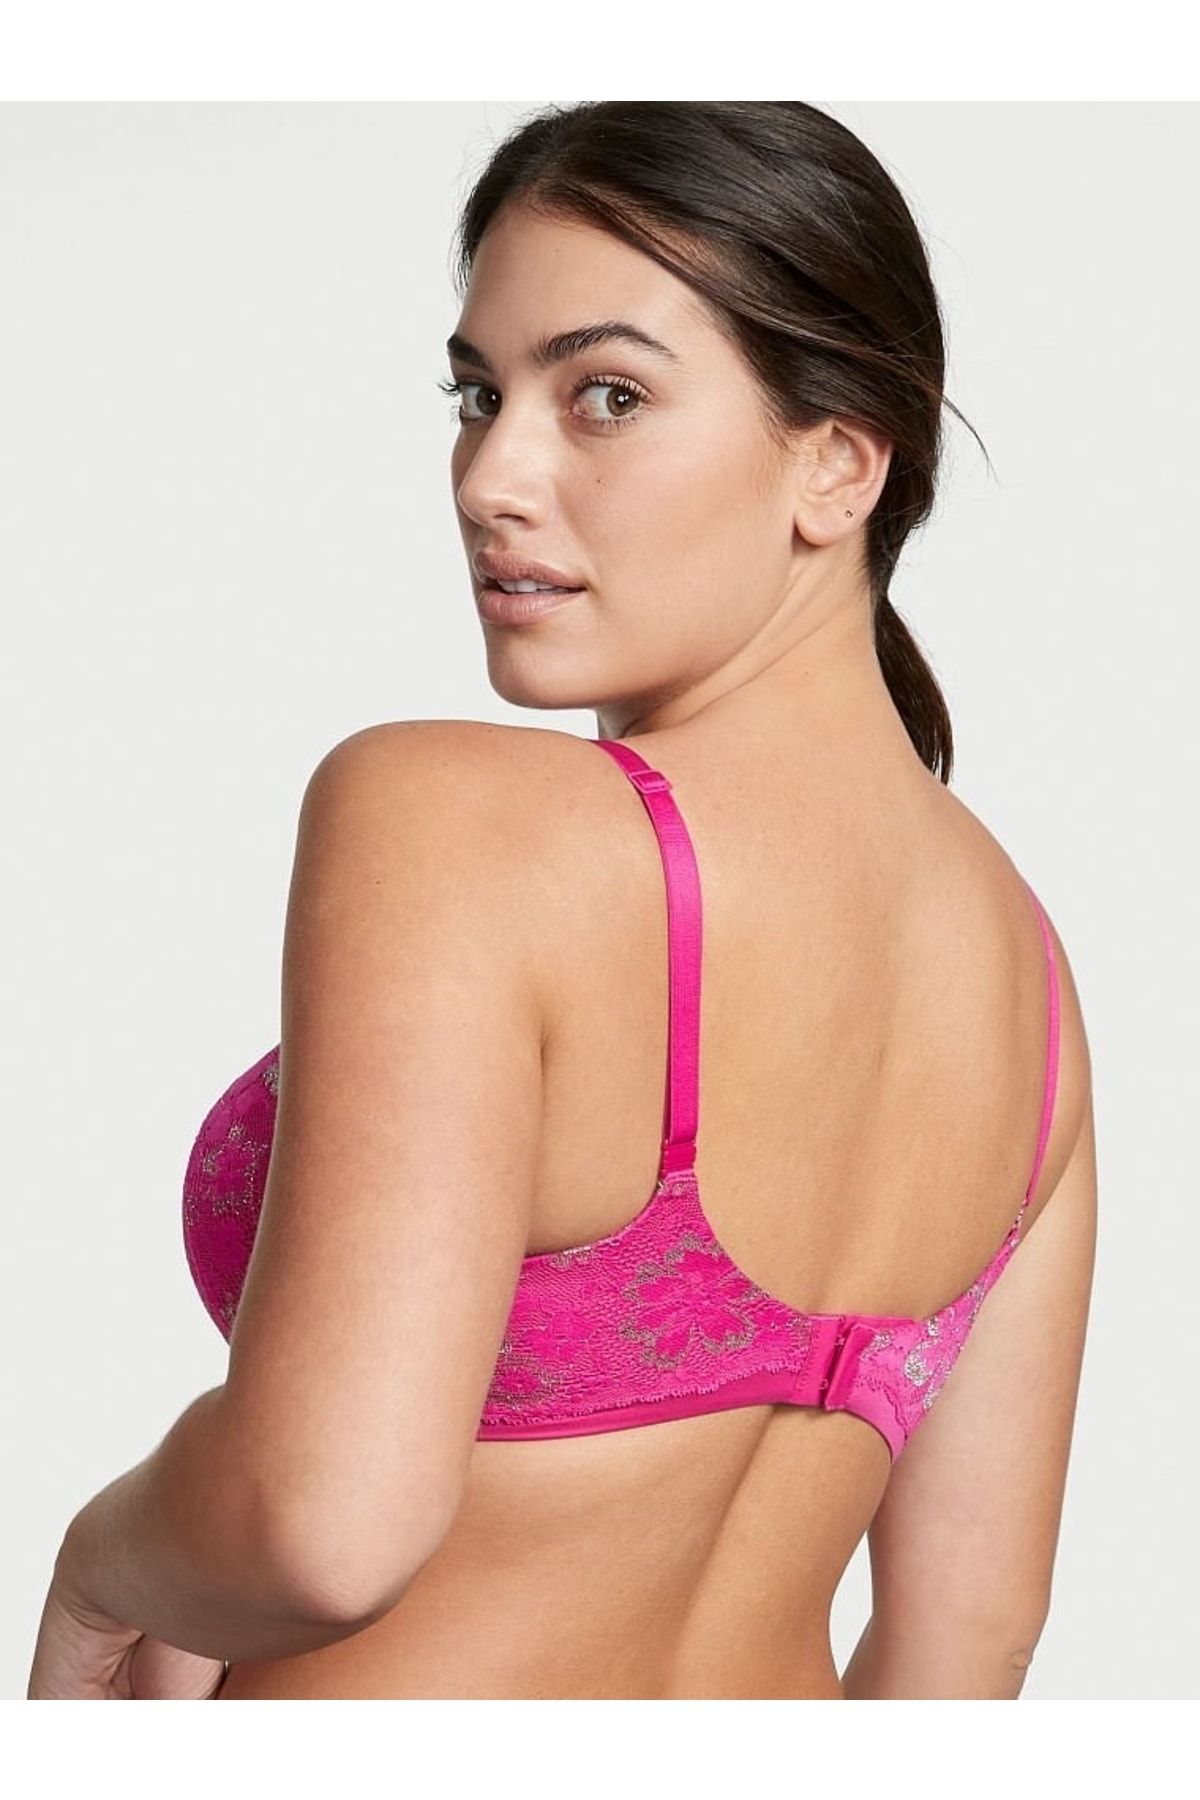 Best Pink Victoria Secret Bra Size 38c. for sale in Metairie, Louisiana for  2024